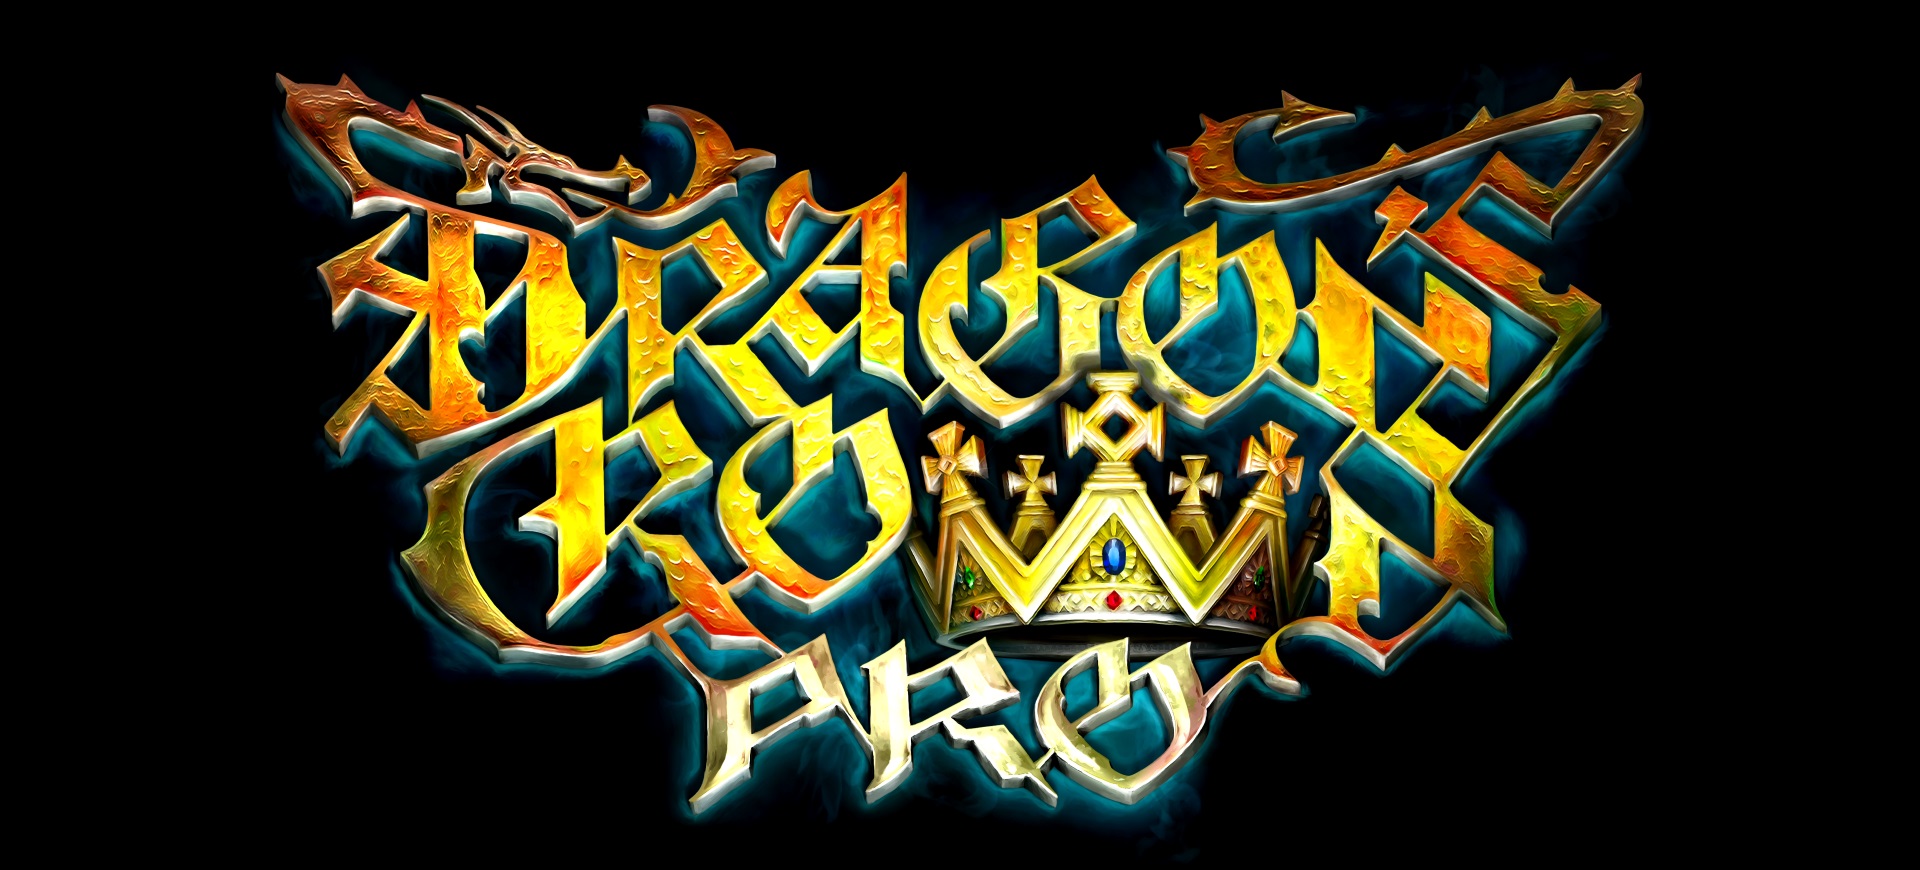 Dragon S Crown Pro Review Another Amazing Remaster From Atlus